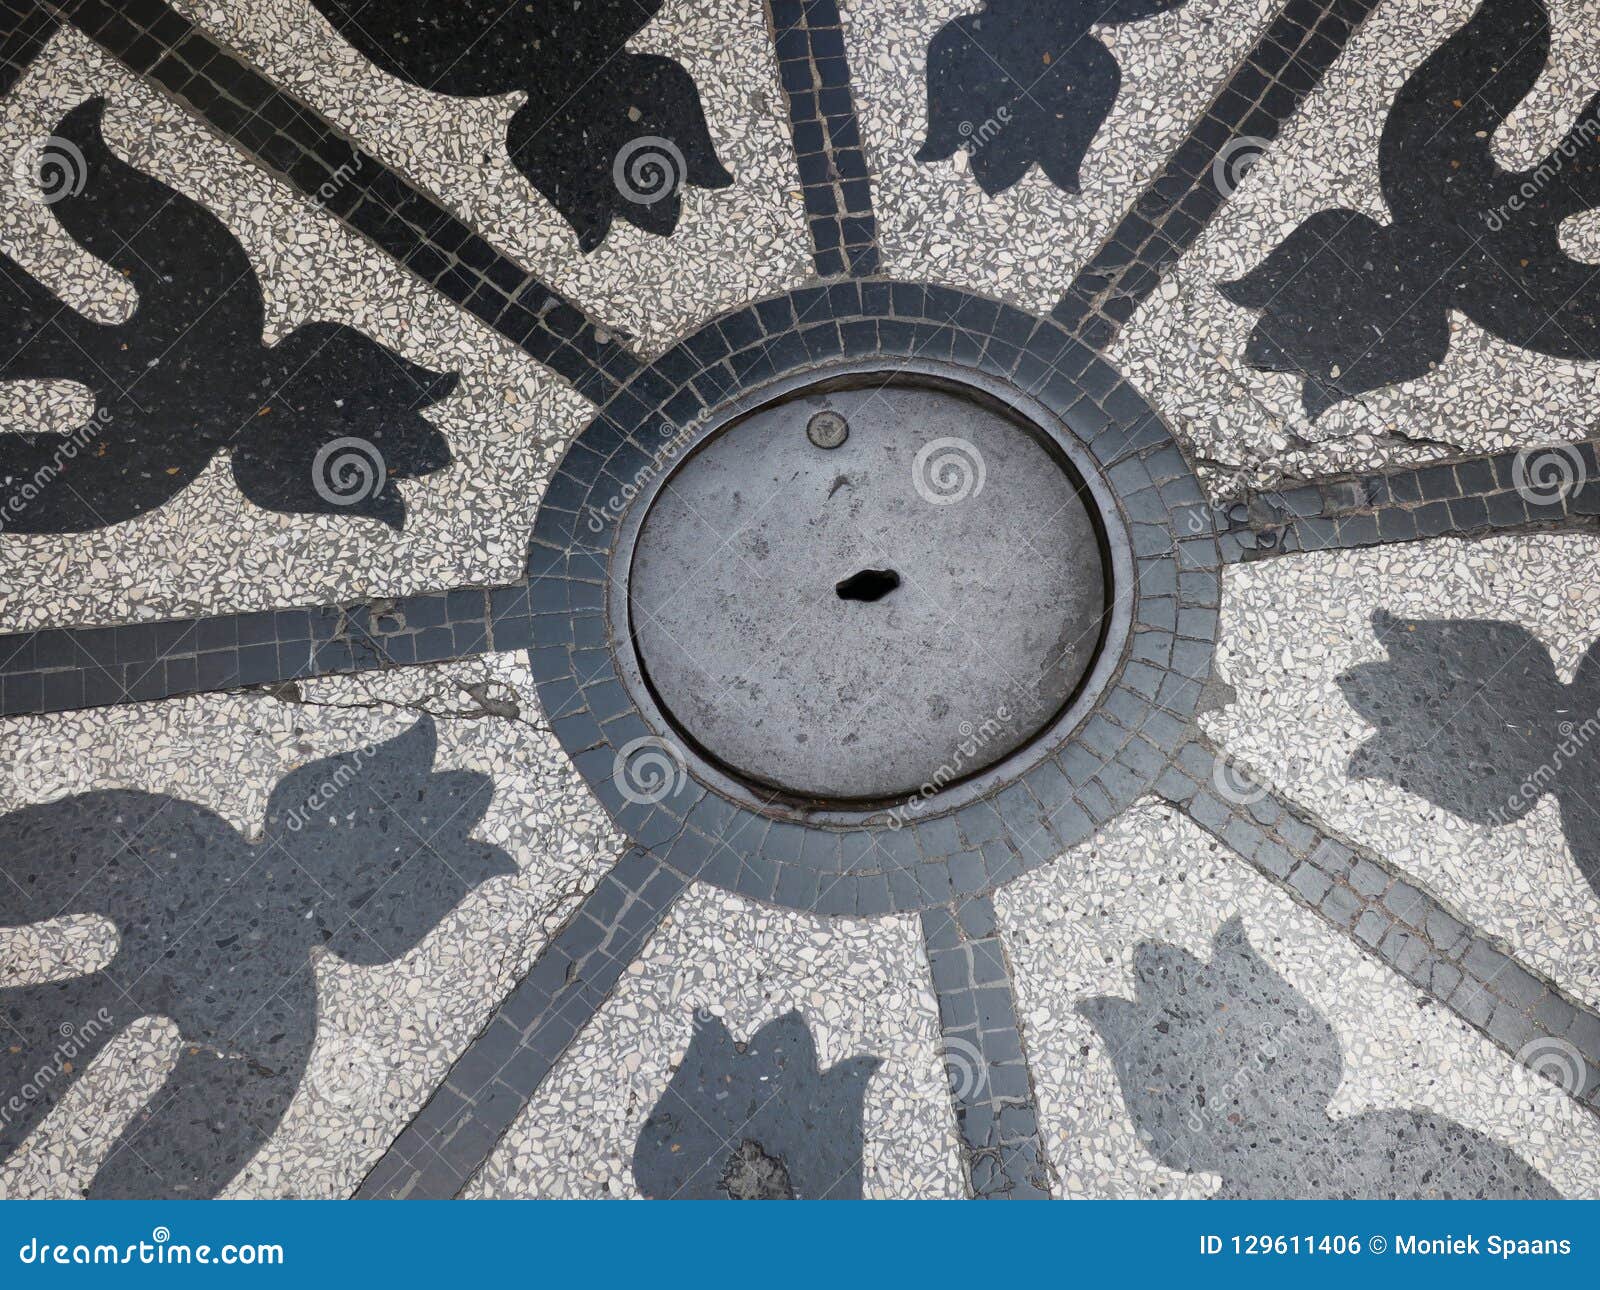 man hole cover with tulip formed decorations in granito